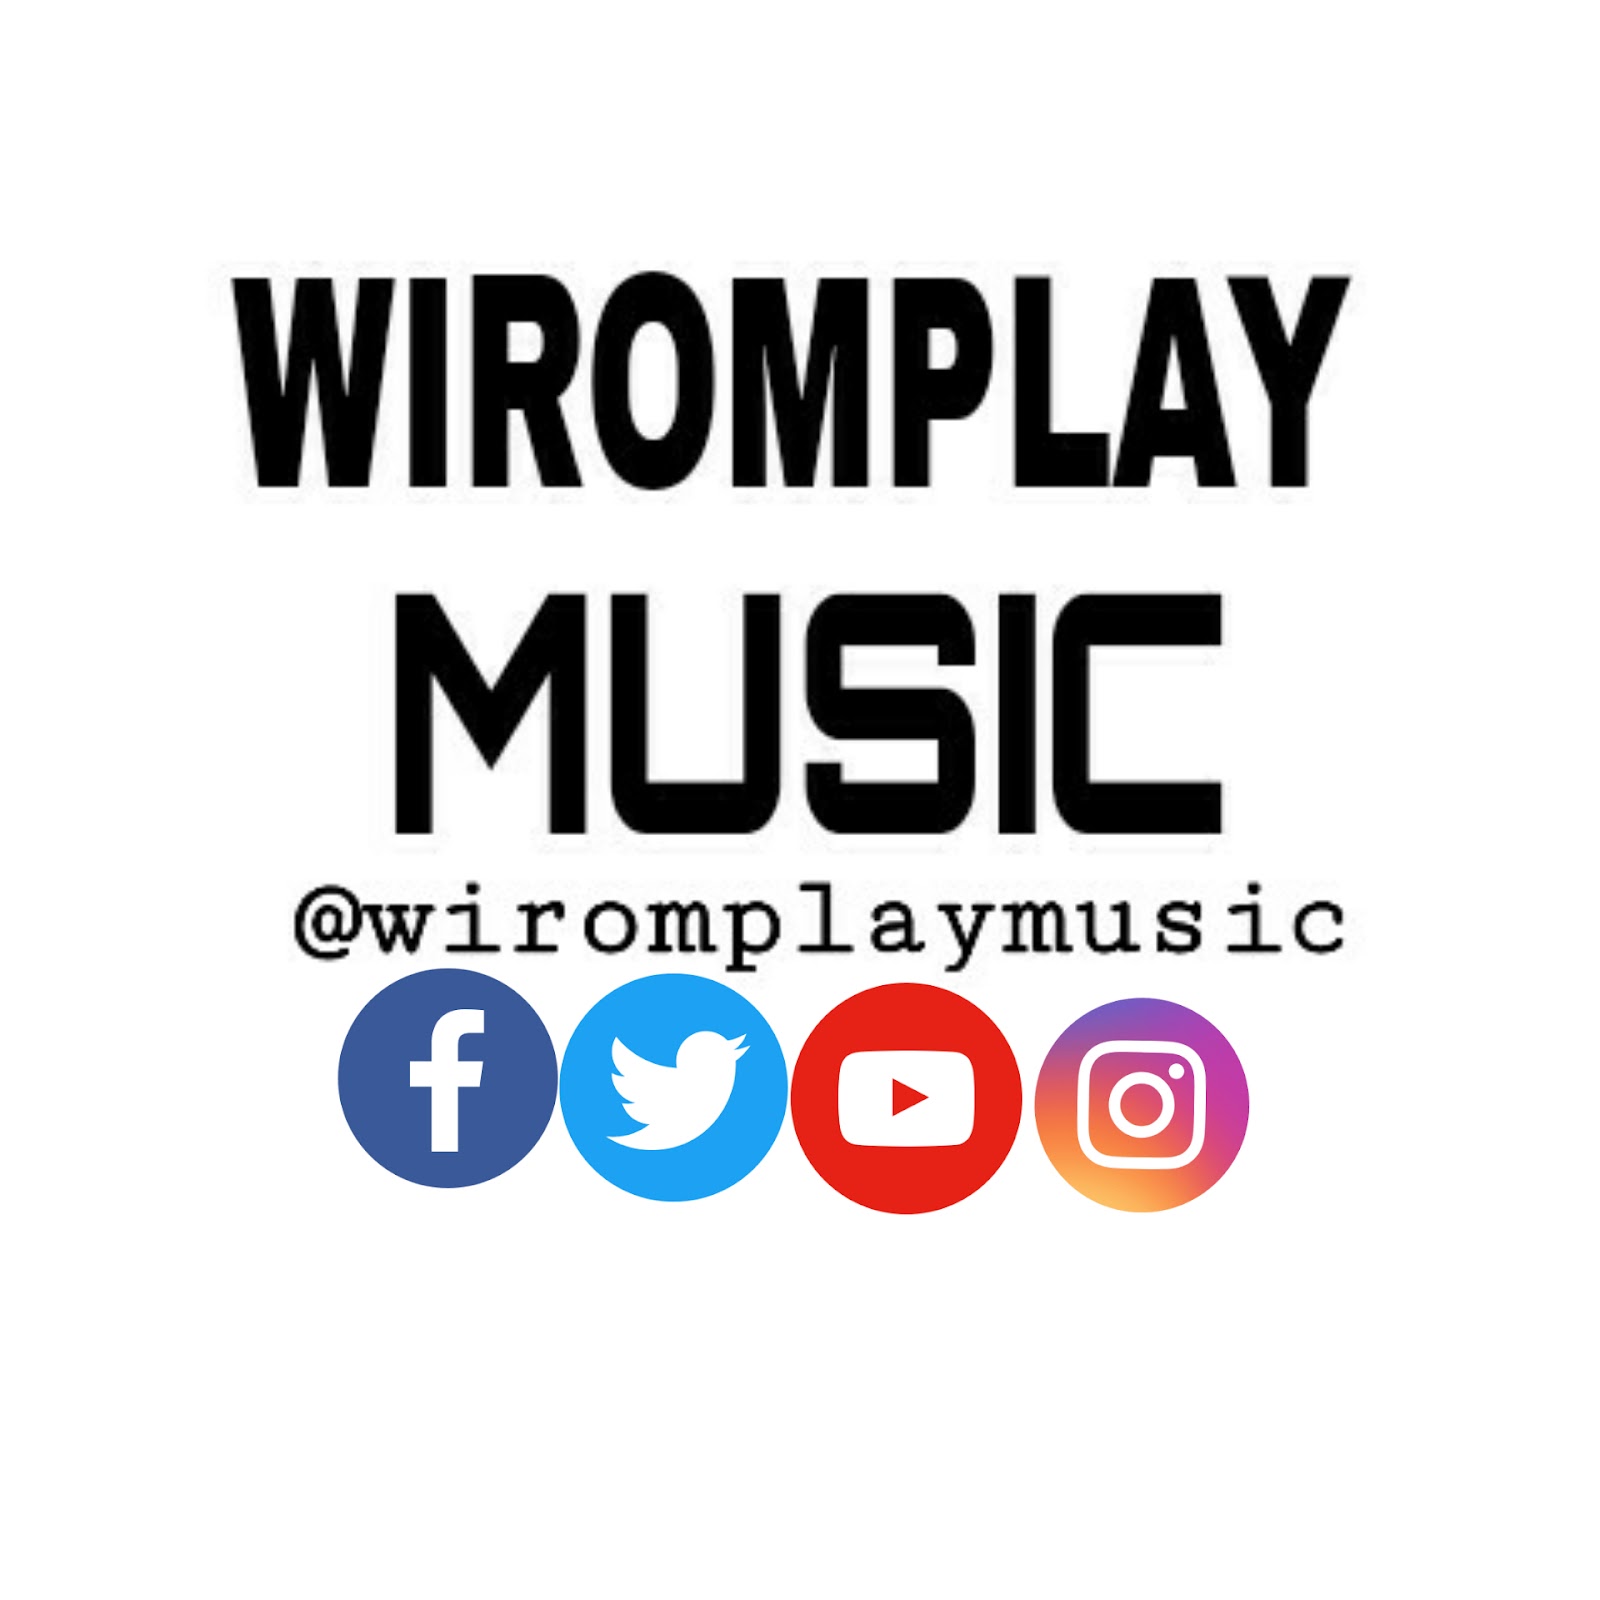 WIROMPLAY MUSIC